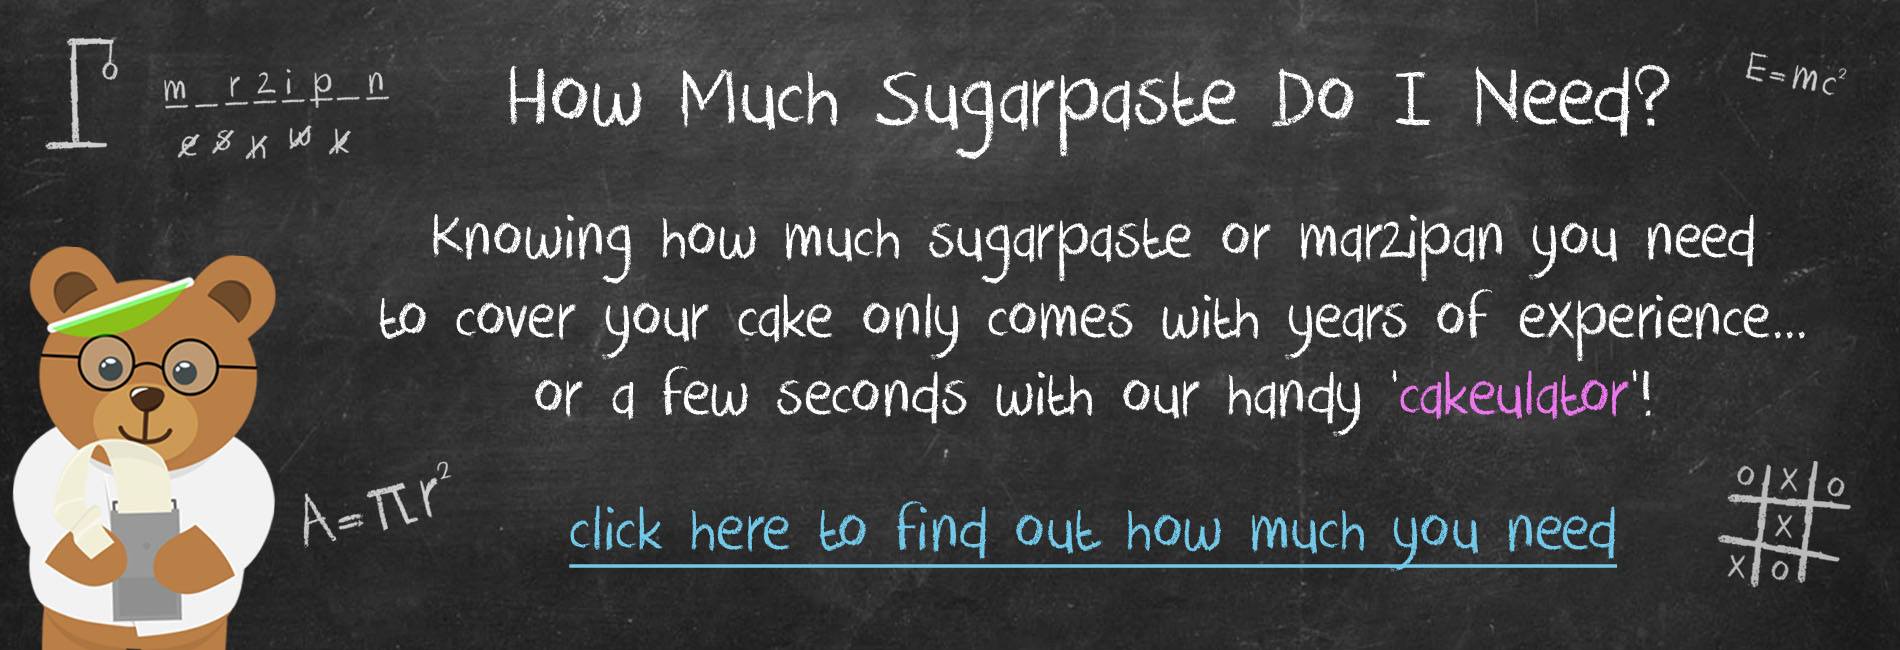 Find out how much sugarpaste you need to cover your cake